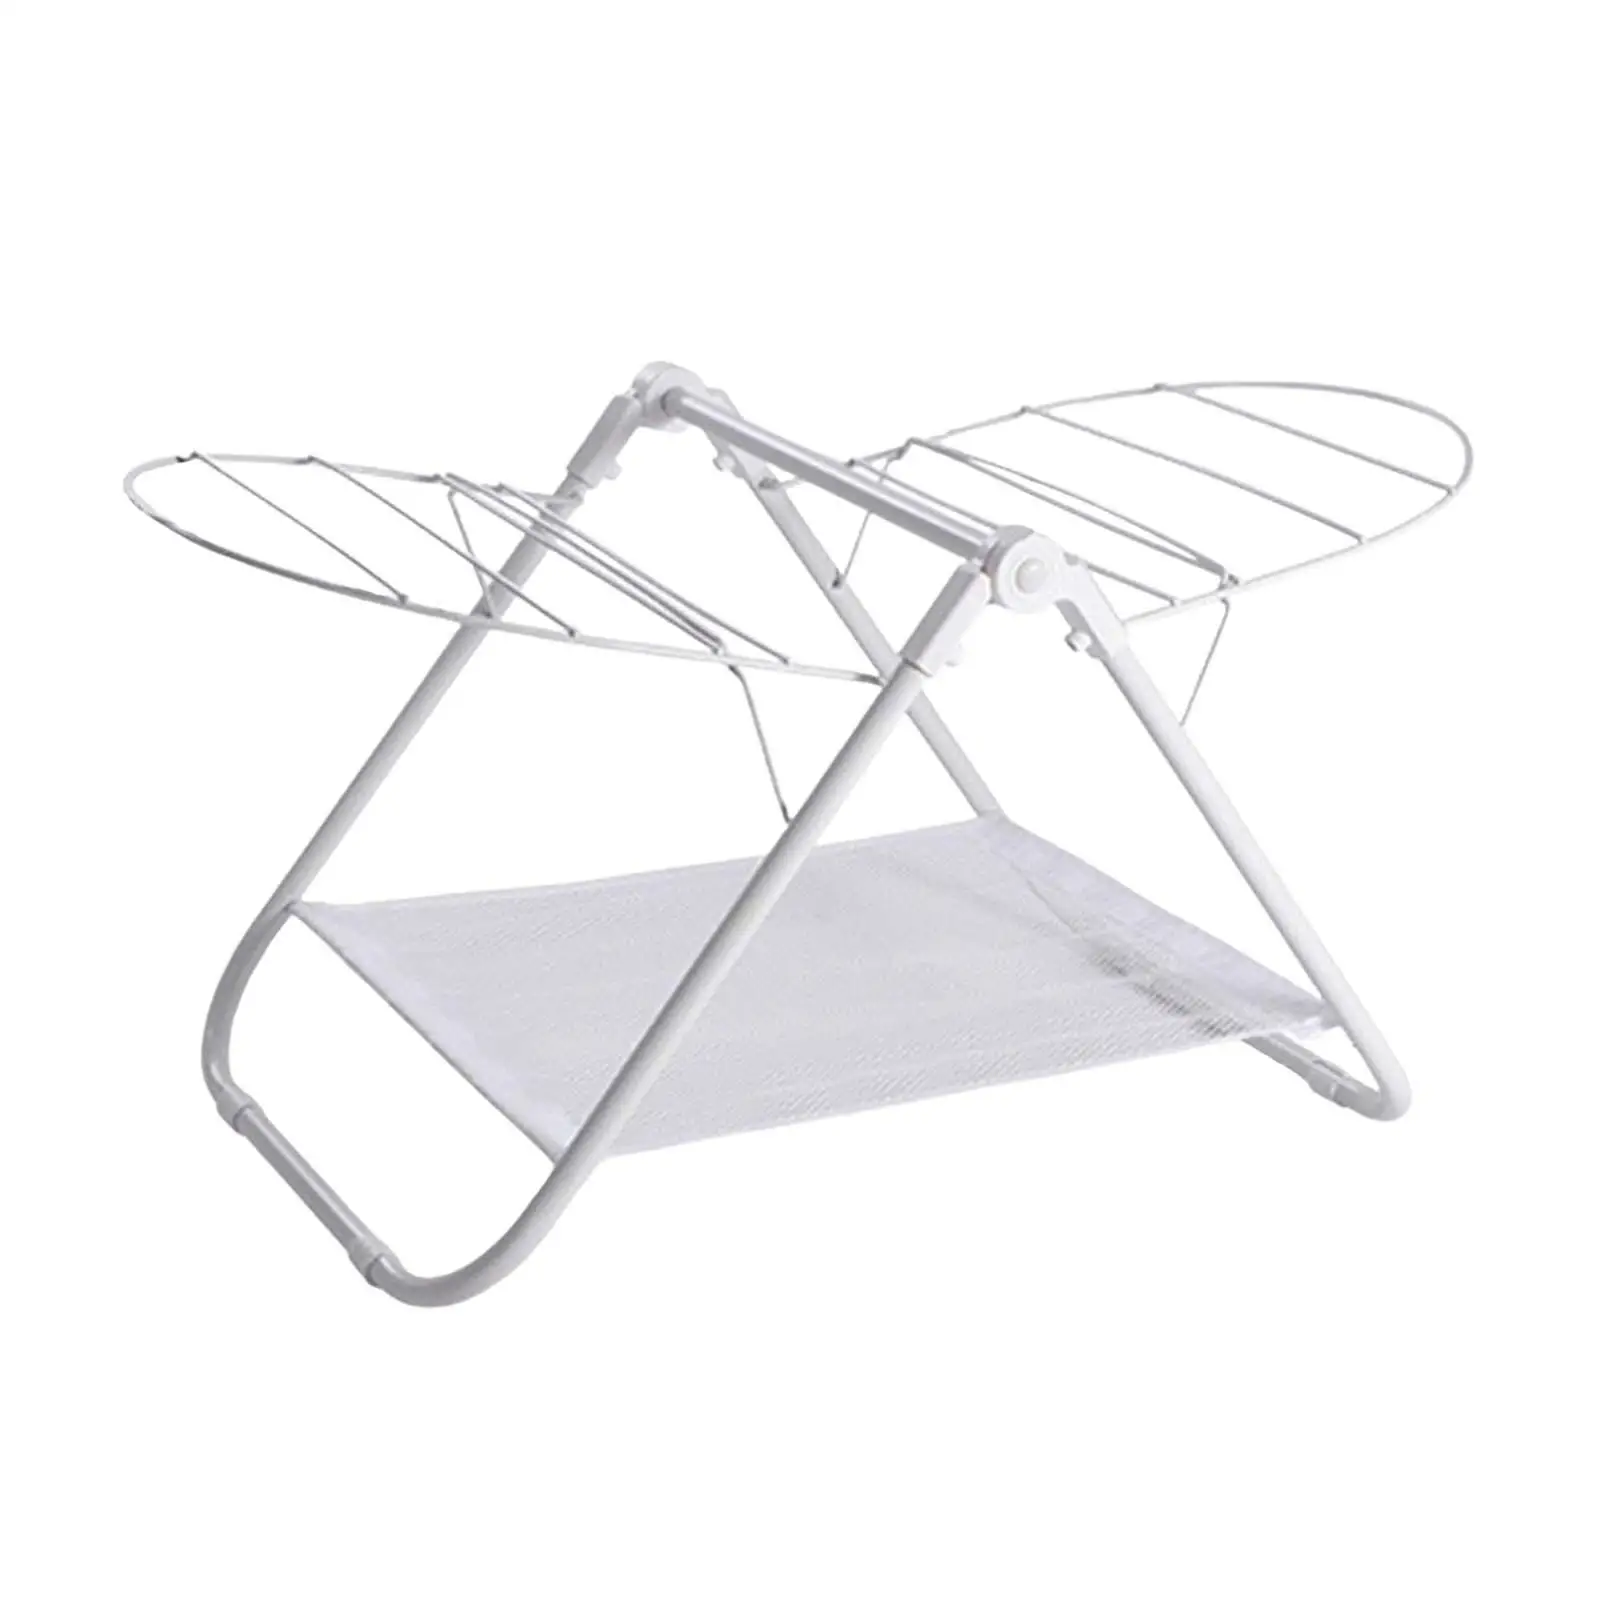 Laundry Garment Dryer Stand Mobile Clothes Airer Large for Quilt Home Pillow